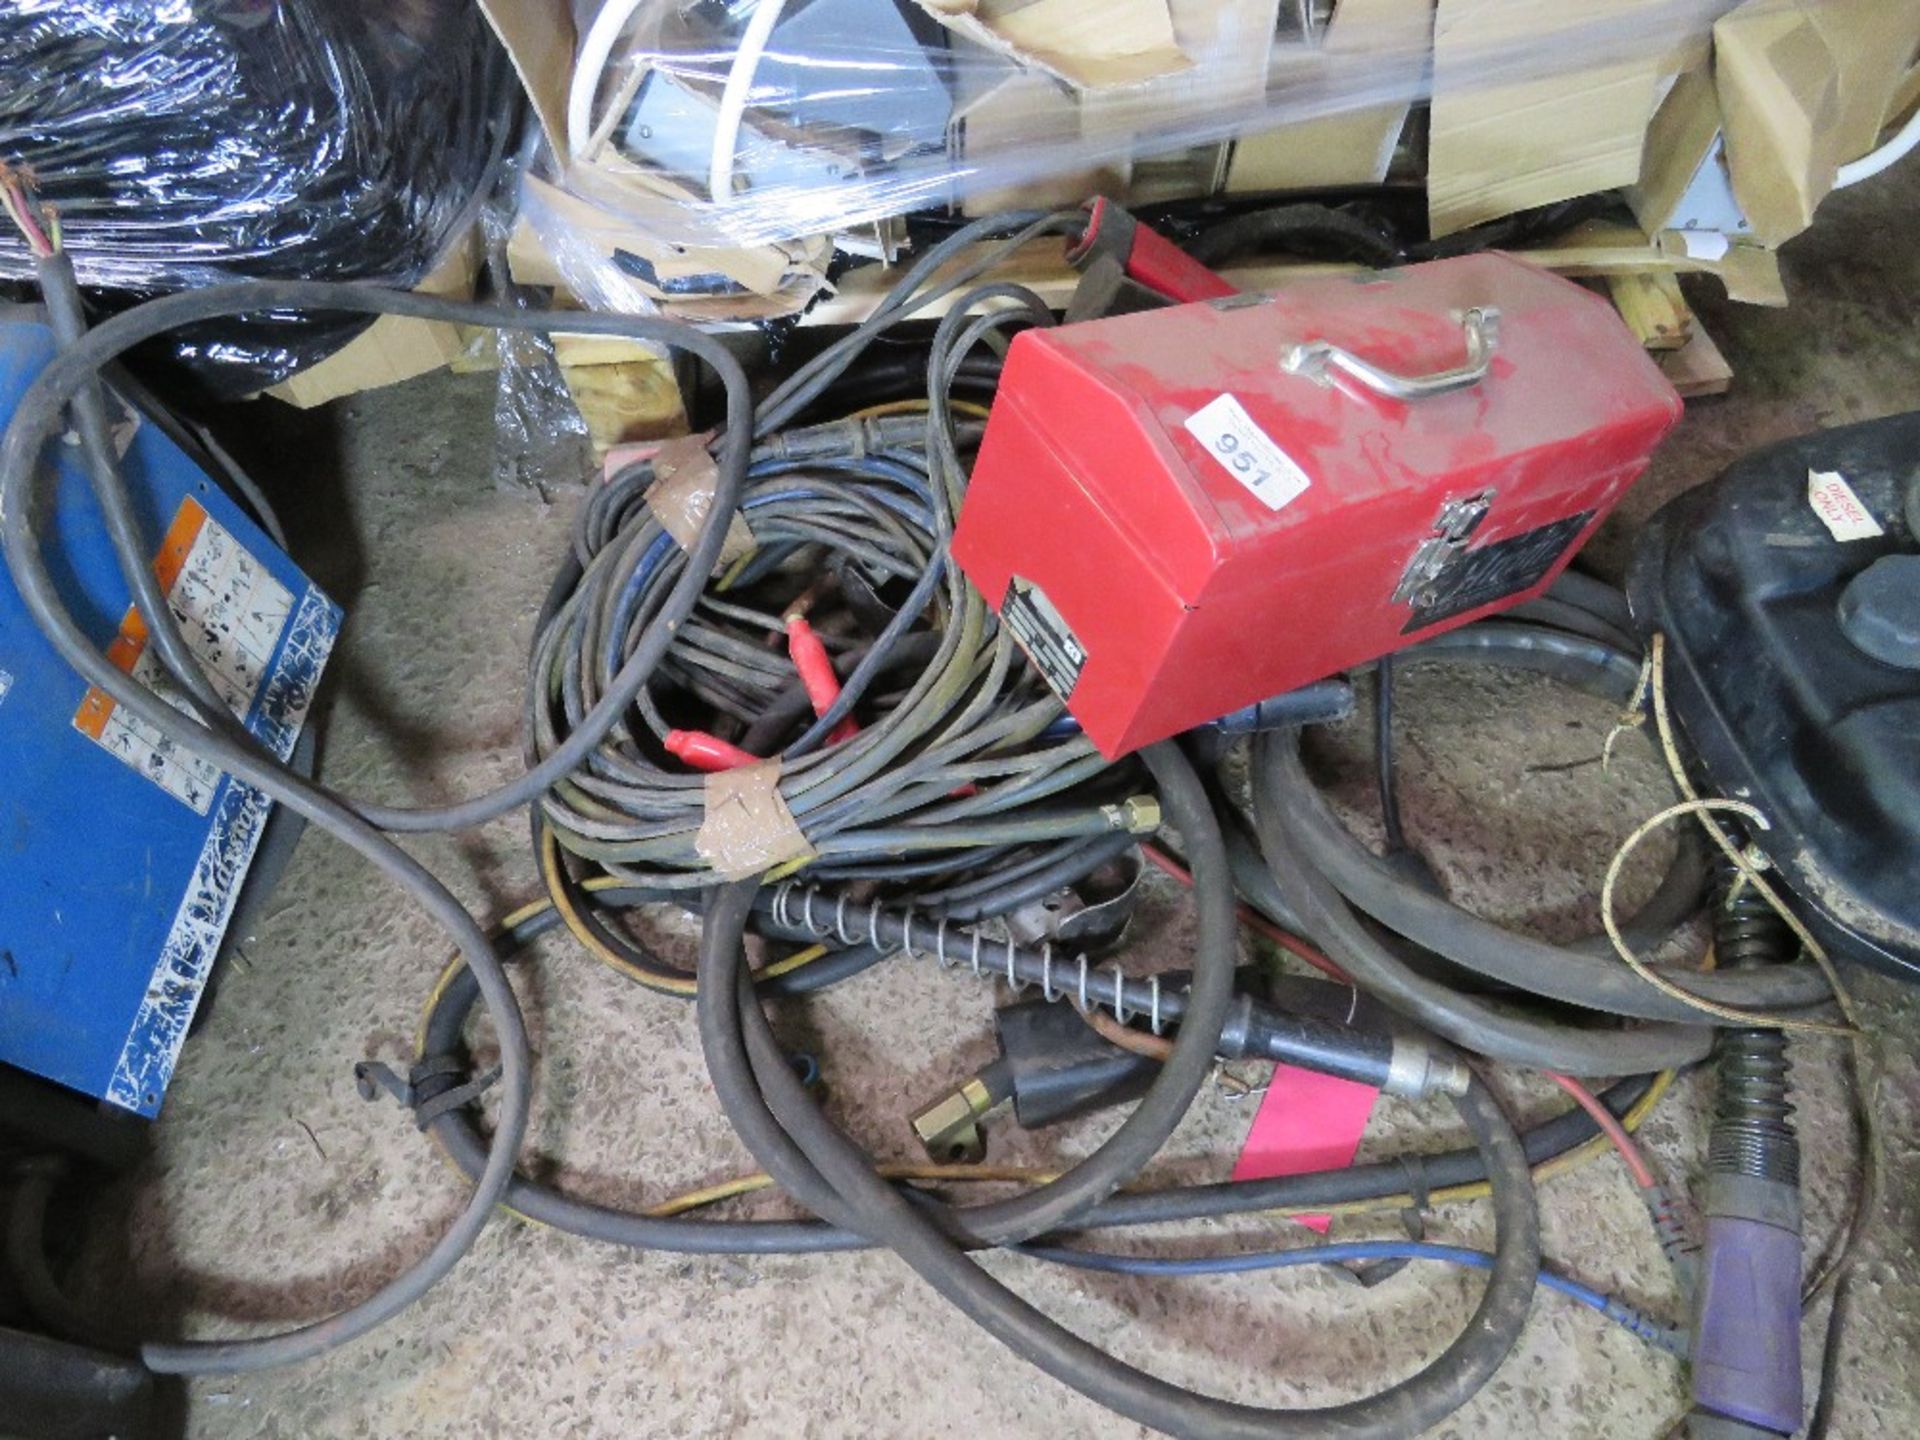 RED TOOL BOX PLUS ASSORTED WELDING LEADS/GUNS.